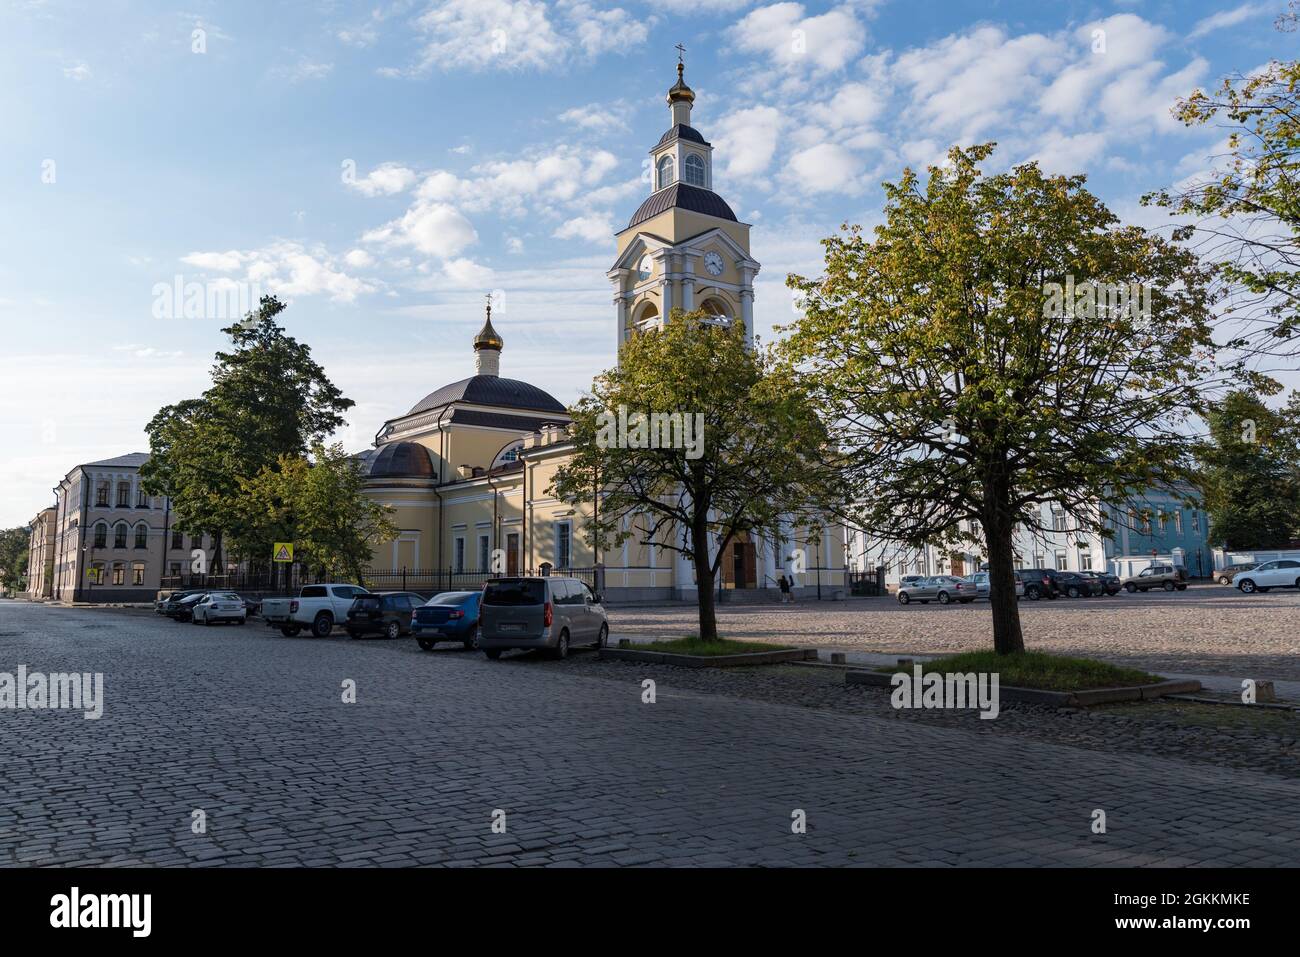 Vyborg, Leningrad Oblast, Russia - August 28, 2021: Transfiguration Cathedral on the Cathedral Square in sunny day Stock Photo